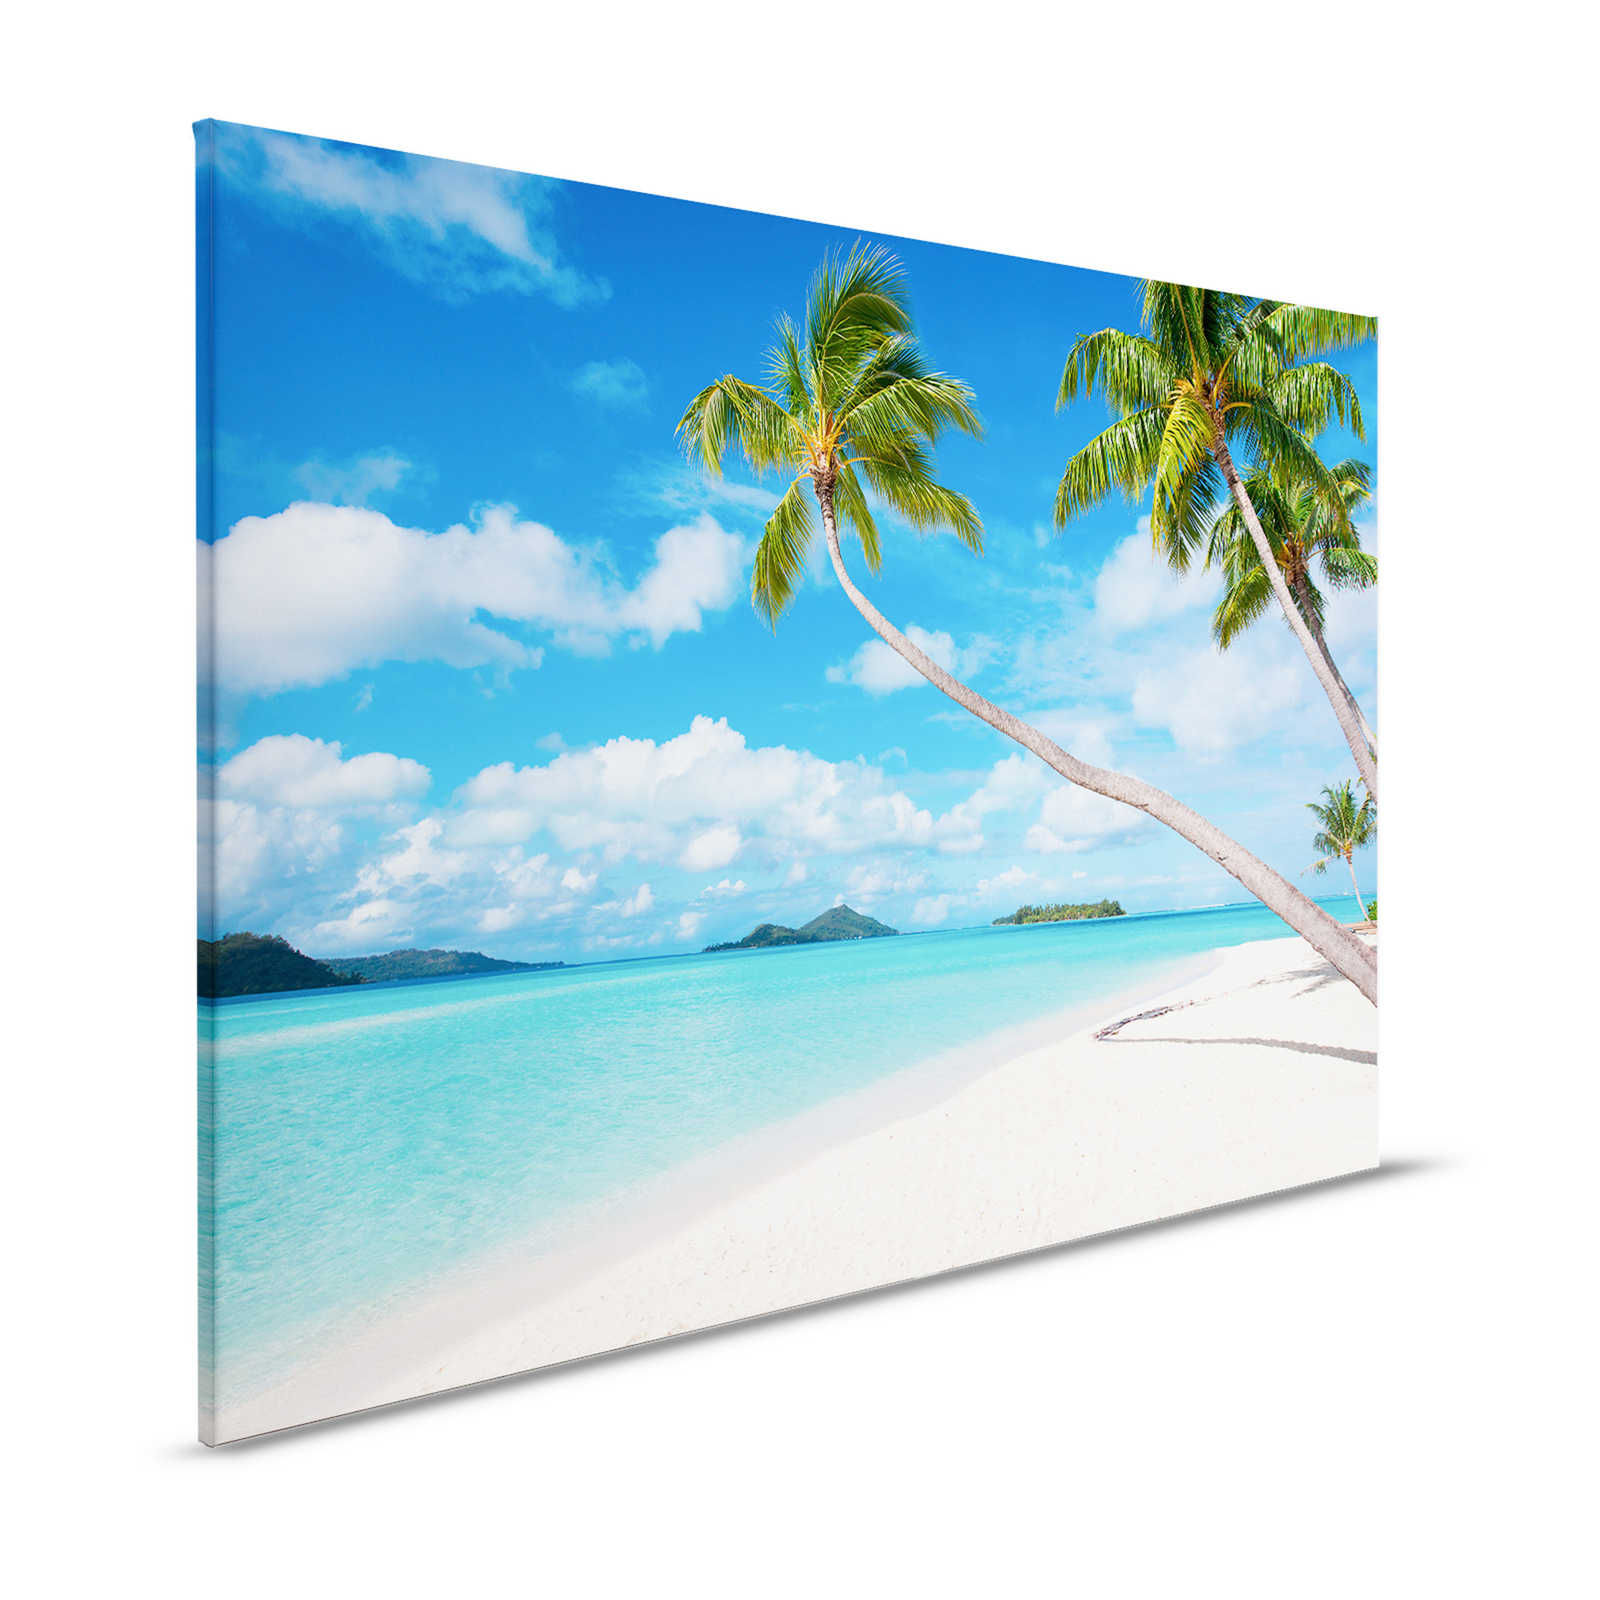 Beach with Palm Tree Canvas Painting and Clear Water - 1.20 m x 0.80 m
